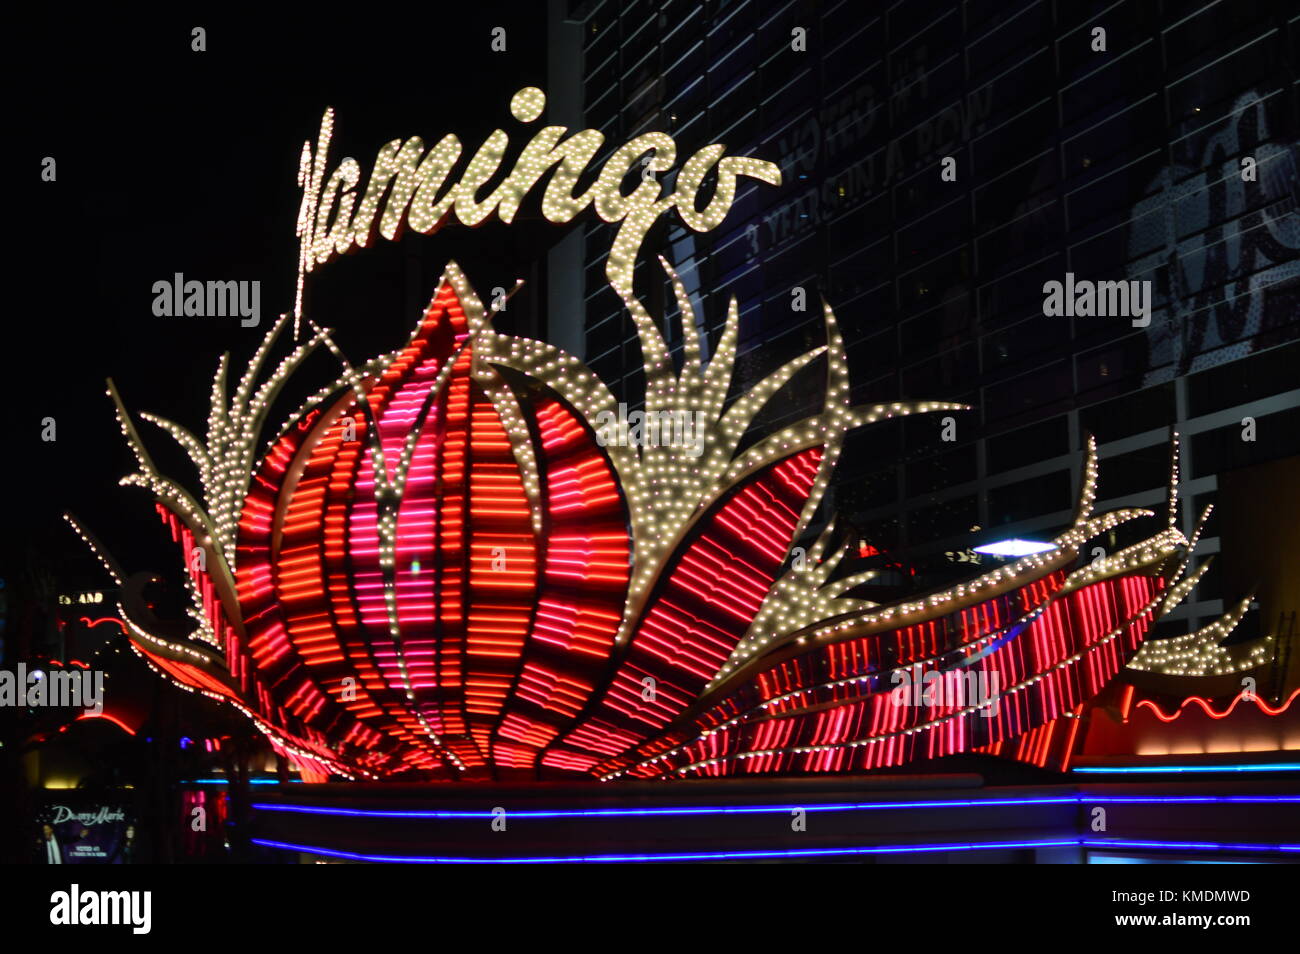 Flamingo casino / hotel entrance with logo and neon light during nighttime on the world famous Las Vegas Strip, Nevada, United States of America. Stock Photo